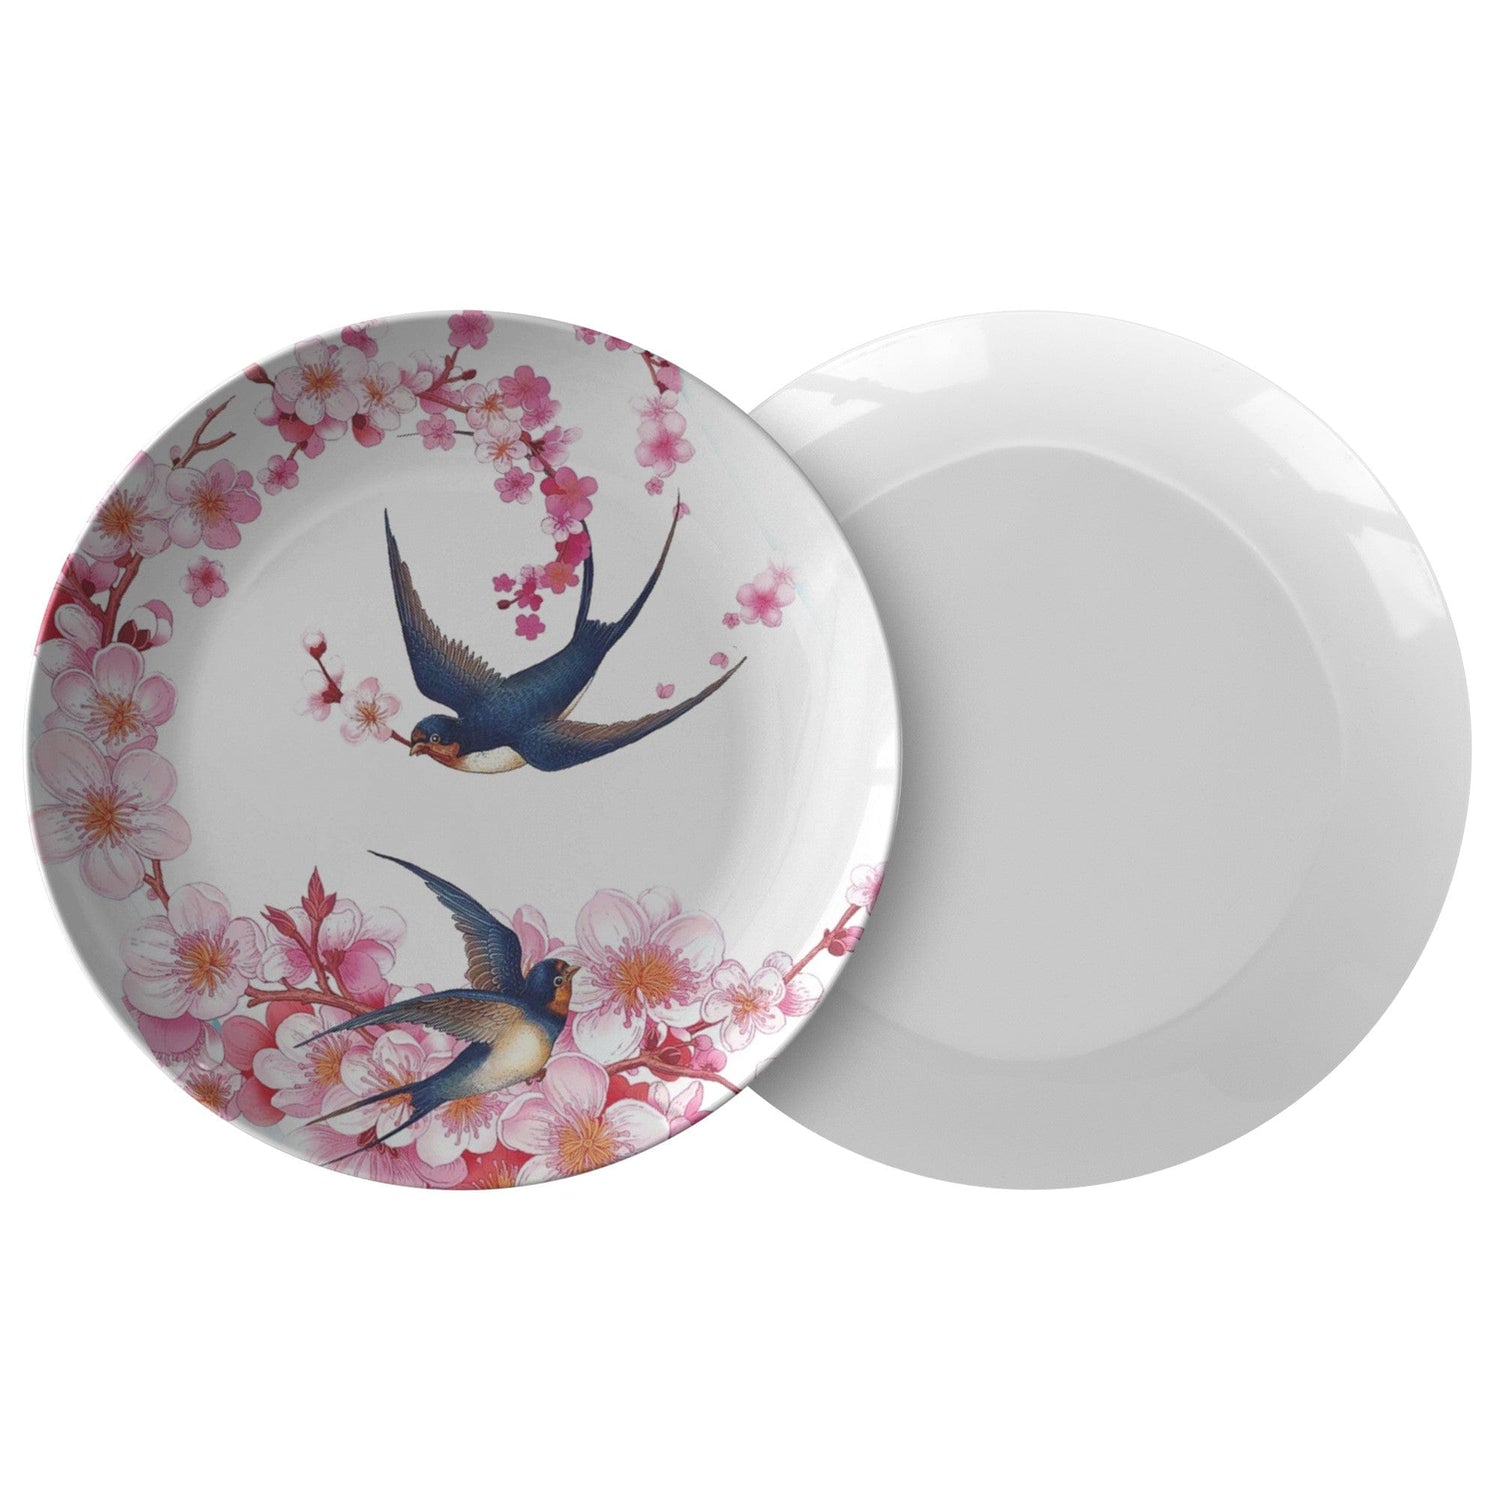 Kate McEnroe New York Swallows in Pink Cherry Blossoms Dinner Plate Plates Set of Two P20-SWA-CBL-B2